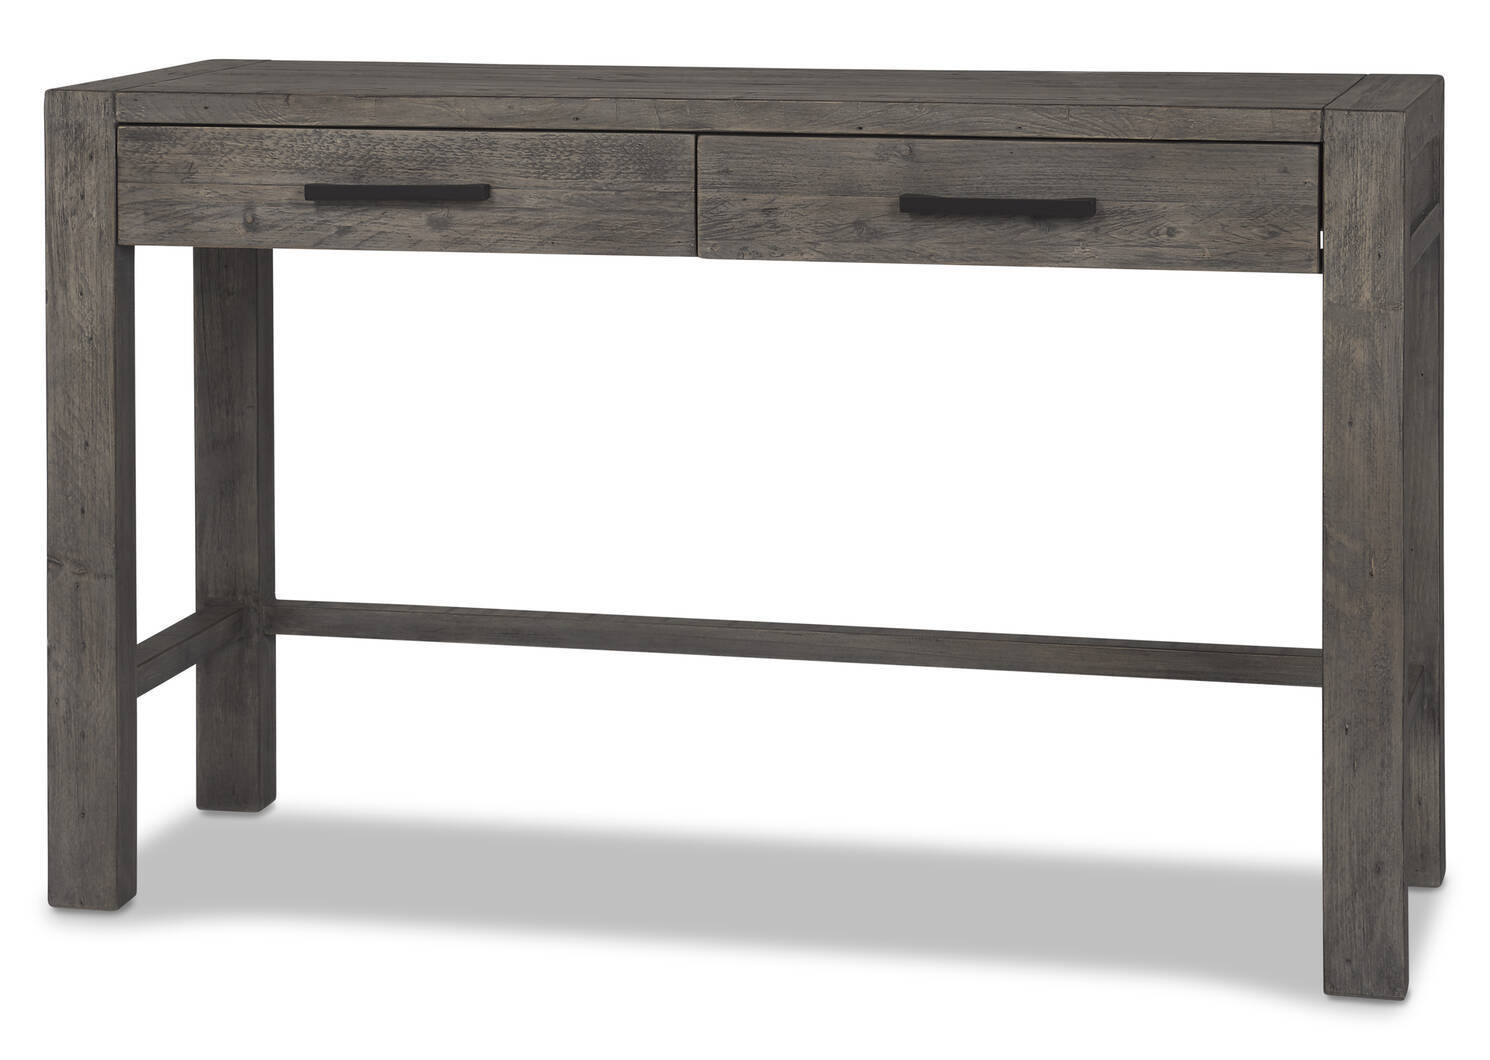 Northwood Console Table -Stanton Ash